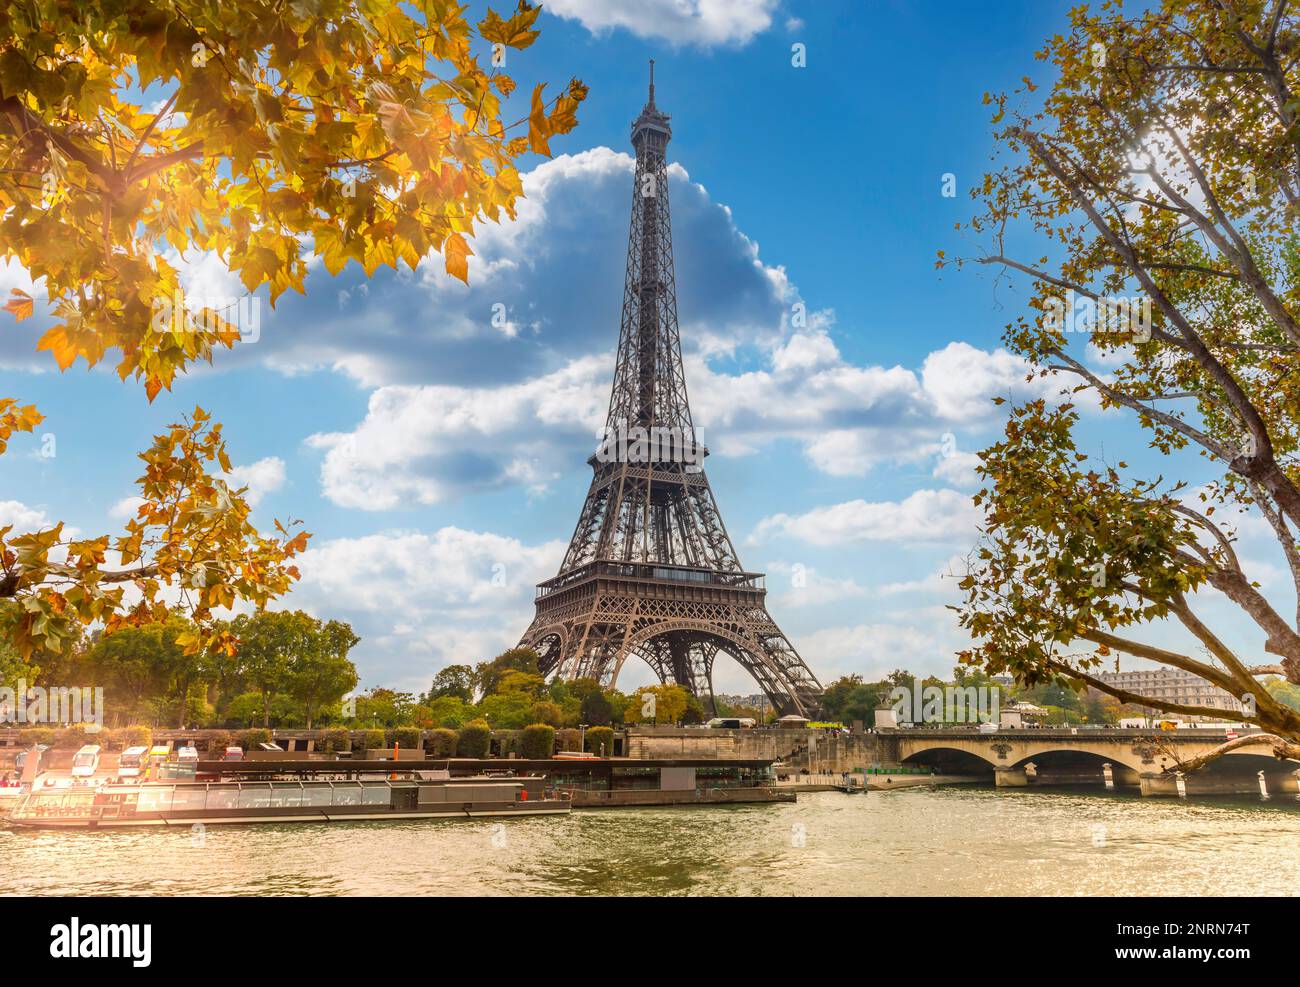 The Eiffel Tower on the banks of the Seine in autumn in Paris, France Stock Photo